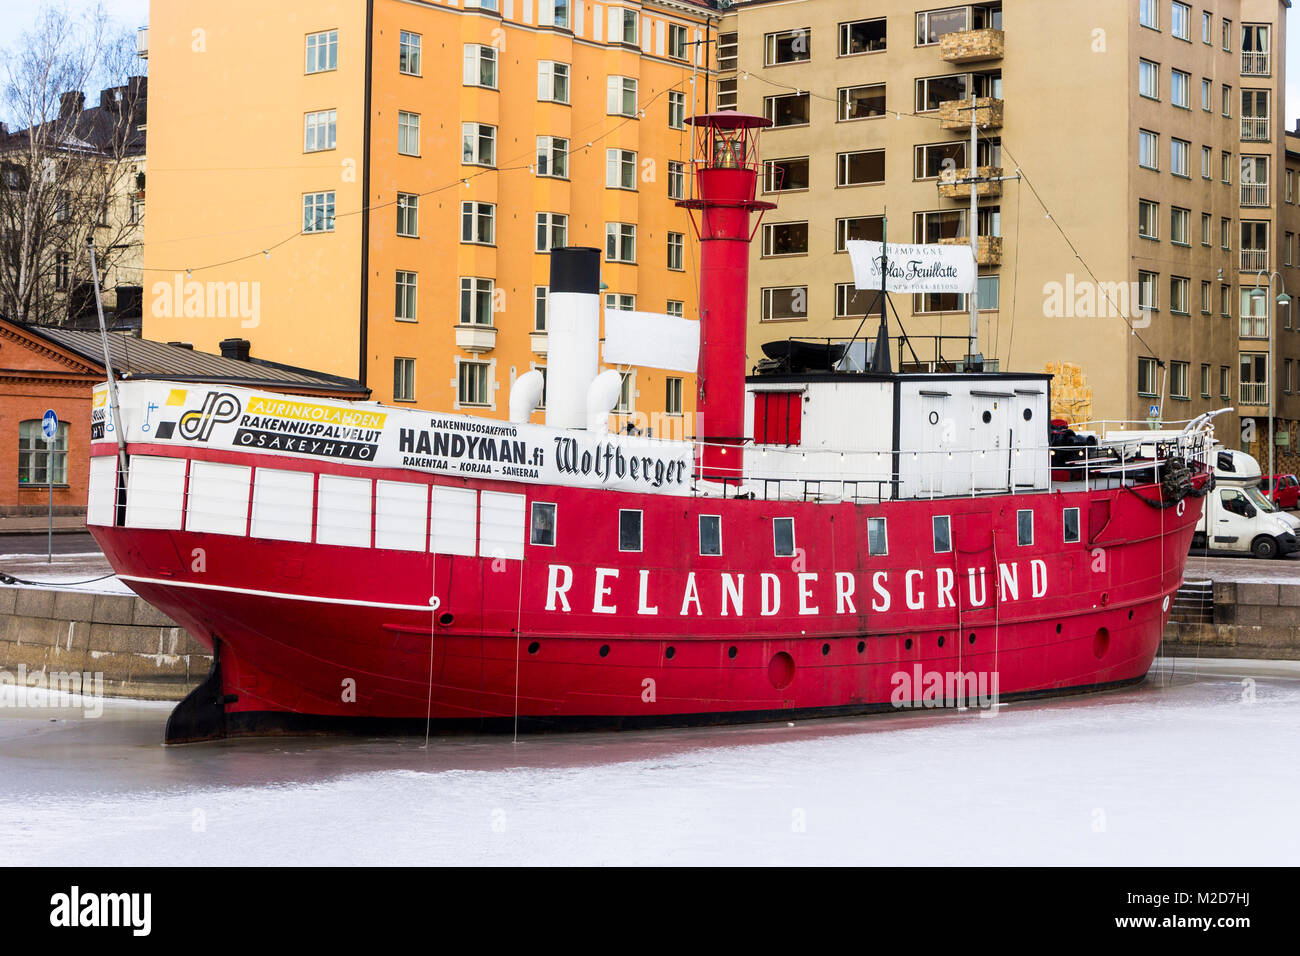 The Majakkalaiva Relandersgrund, a former Finnish lightship (a ship which acts as a lighthouse) painted red that now serves as a restaurant in Helsink Stock Photo